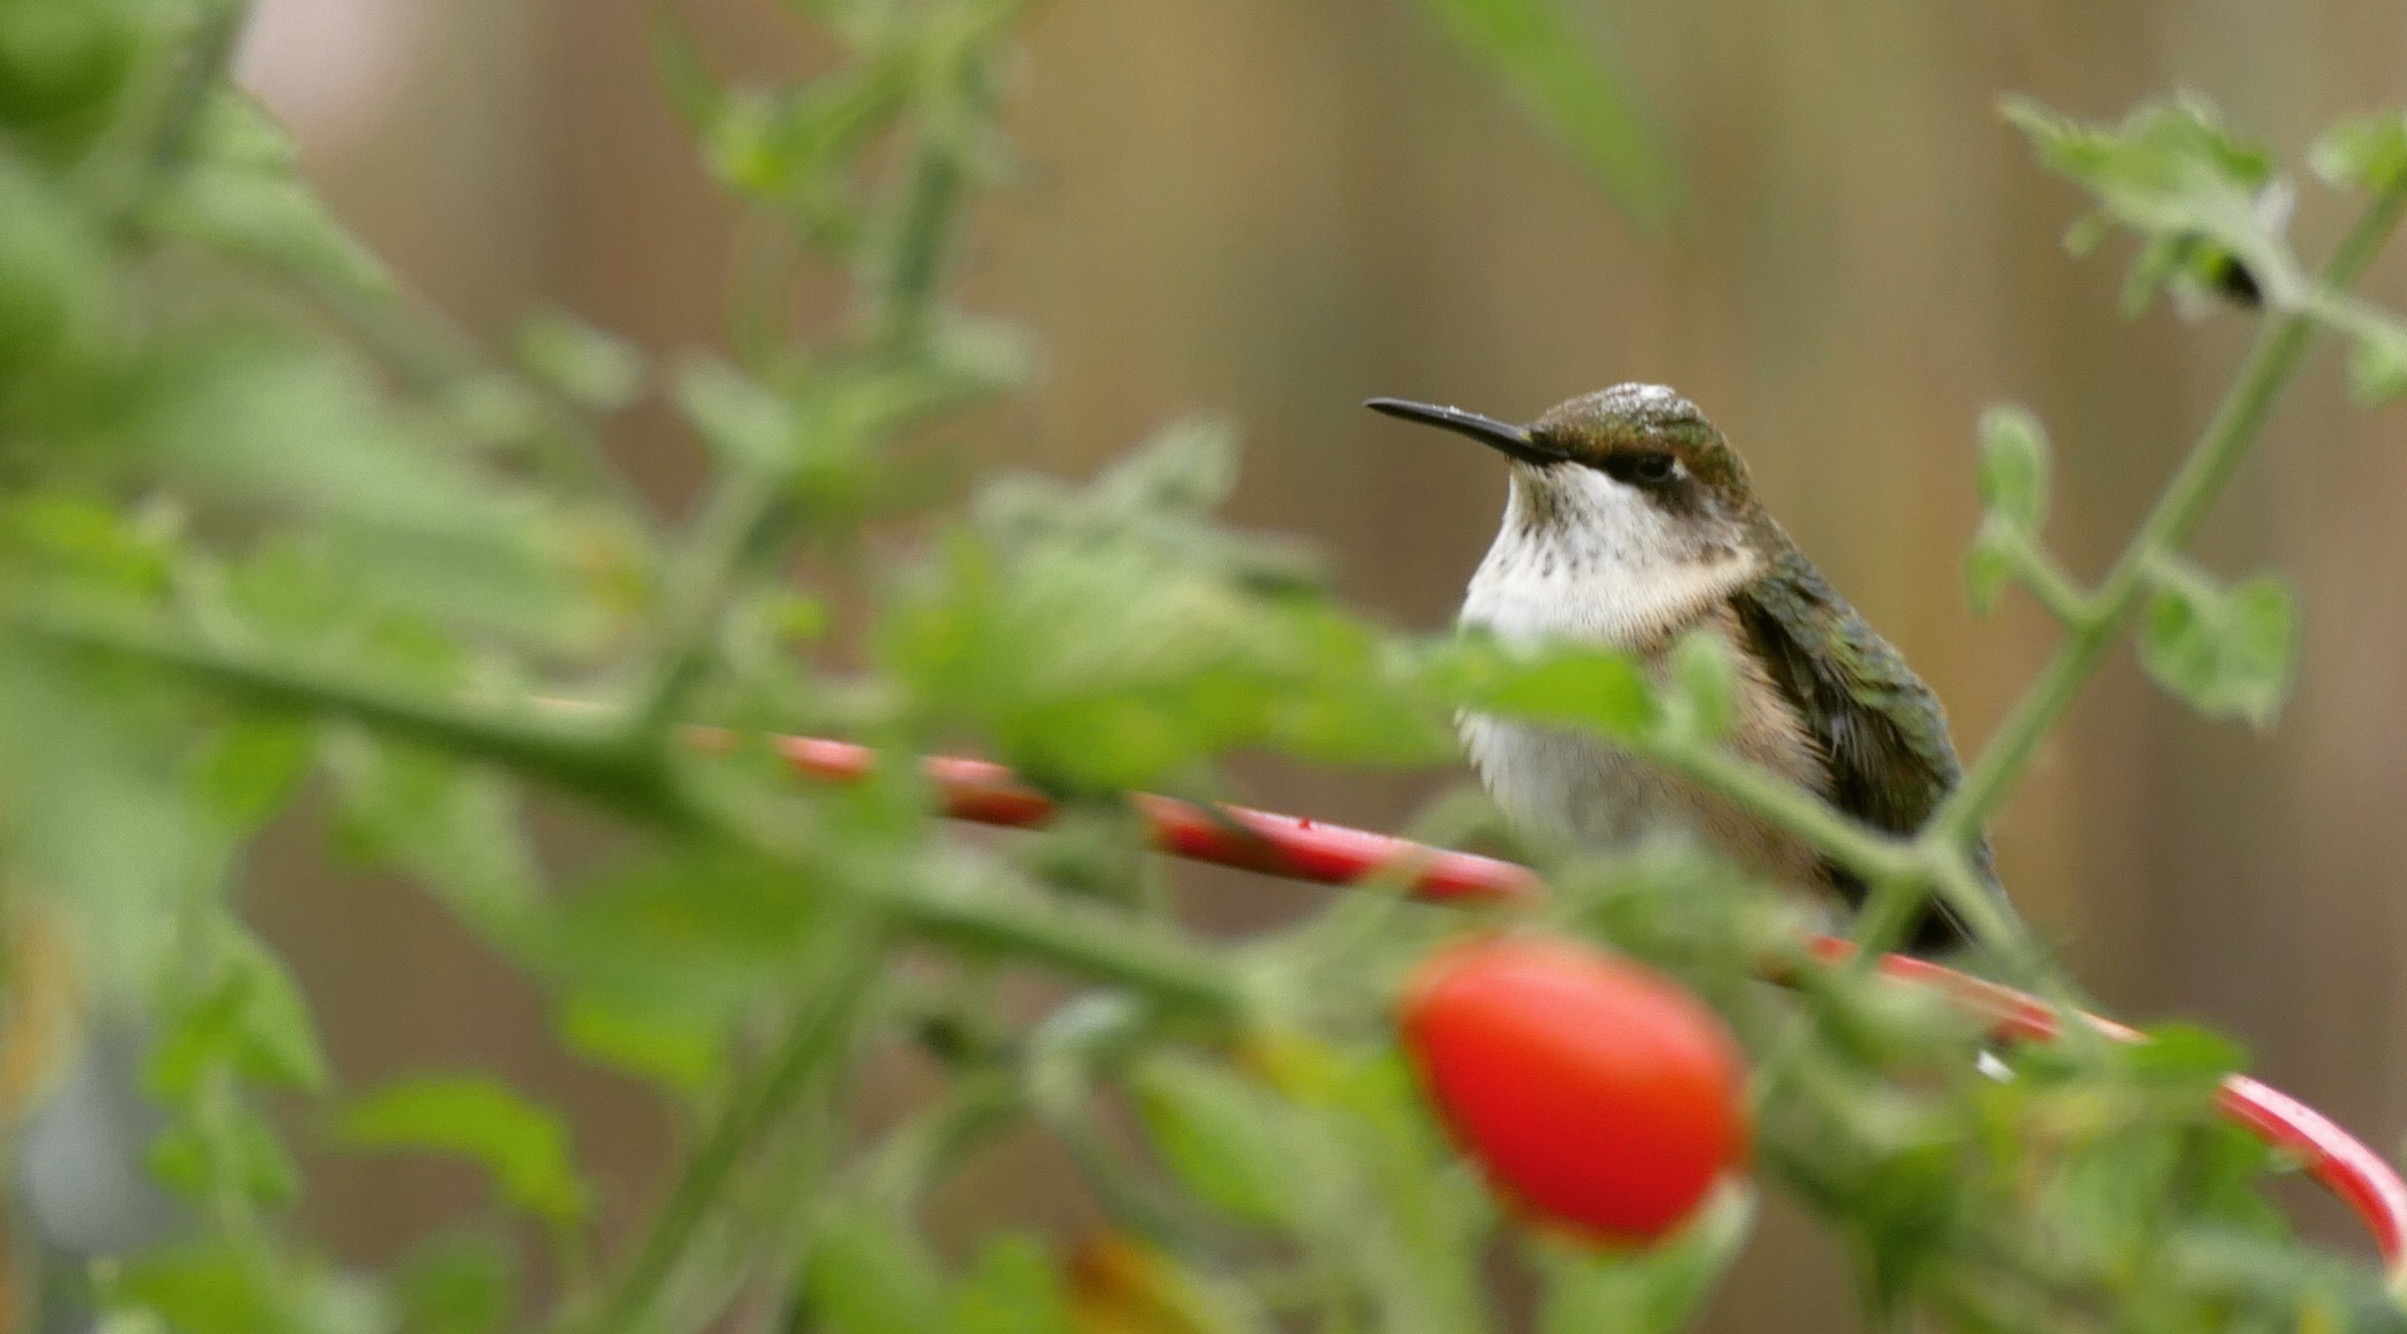 female ruby throated hummingbird at rest